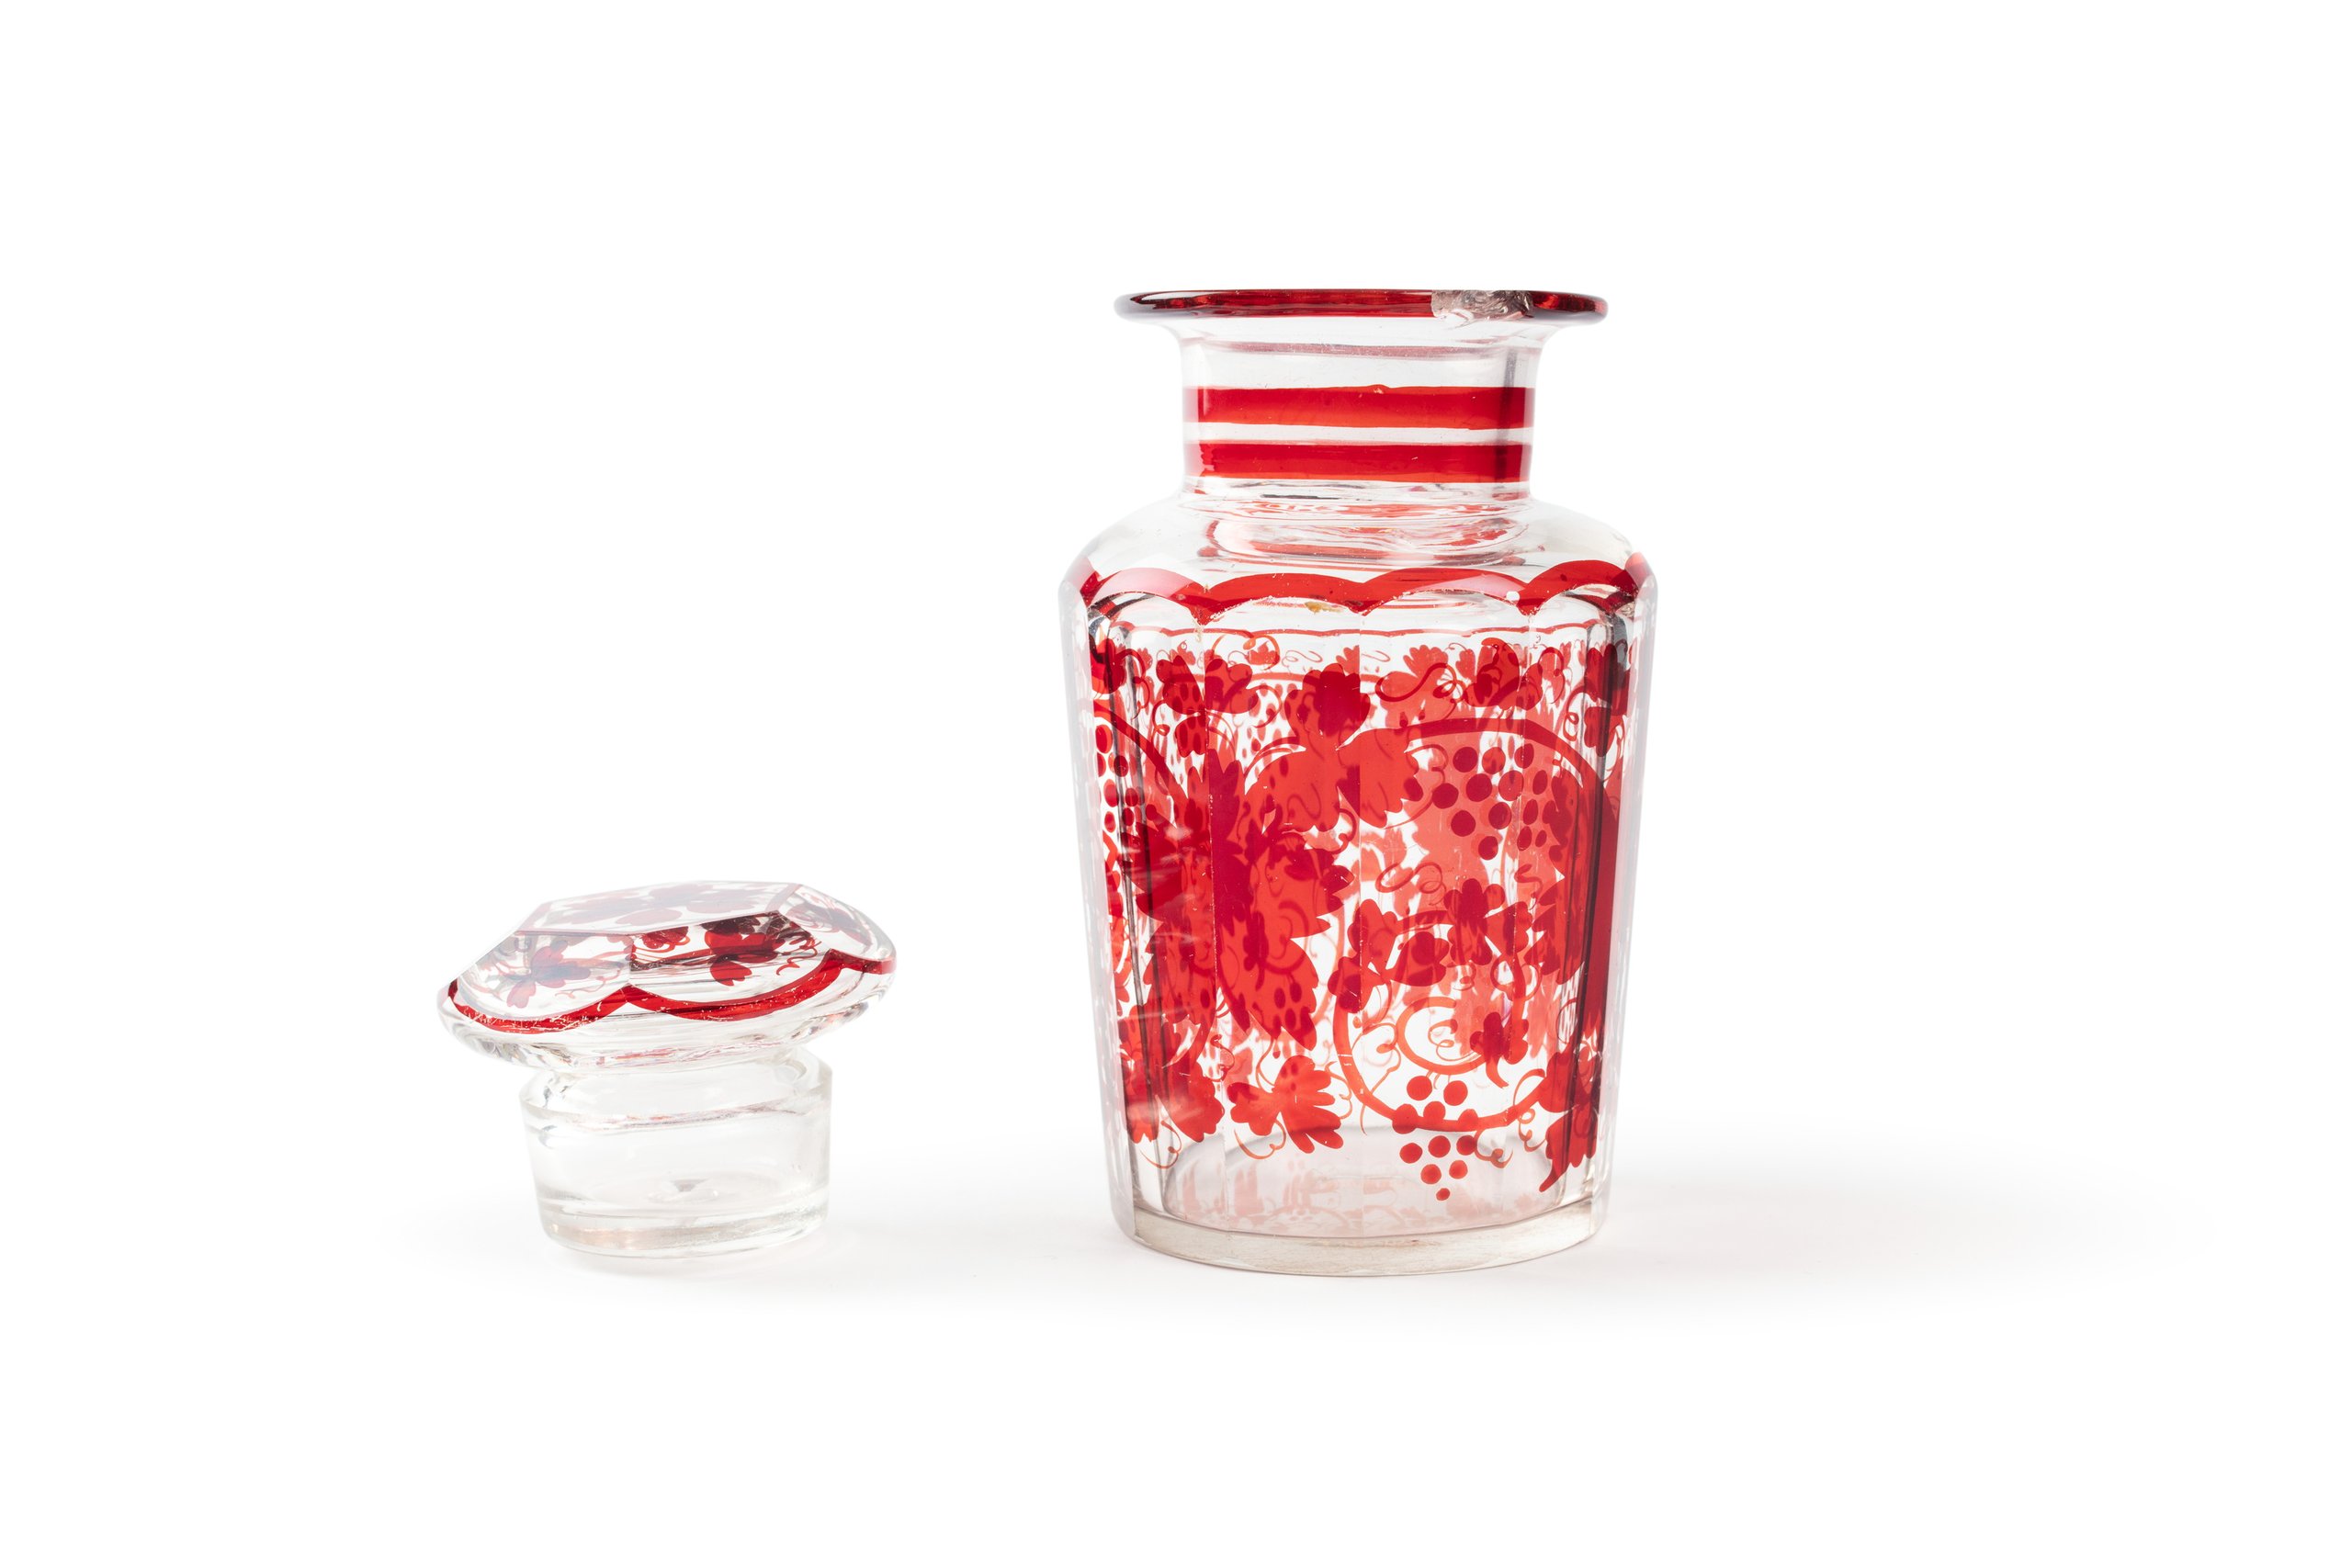 Ruby red glass jar made in England